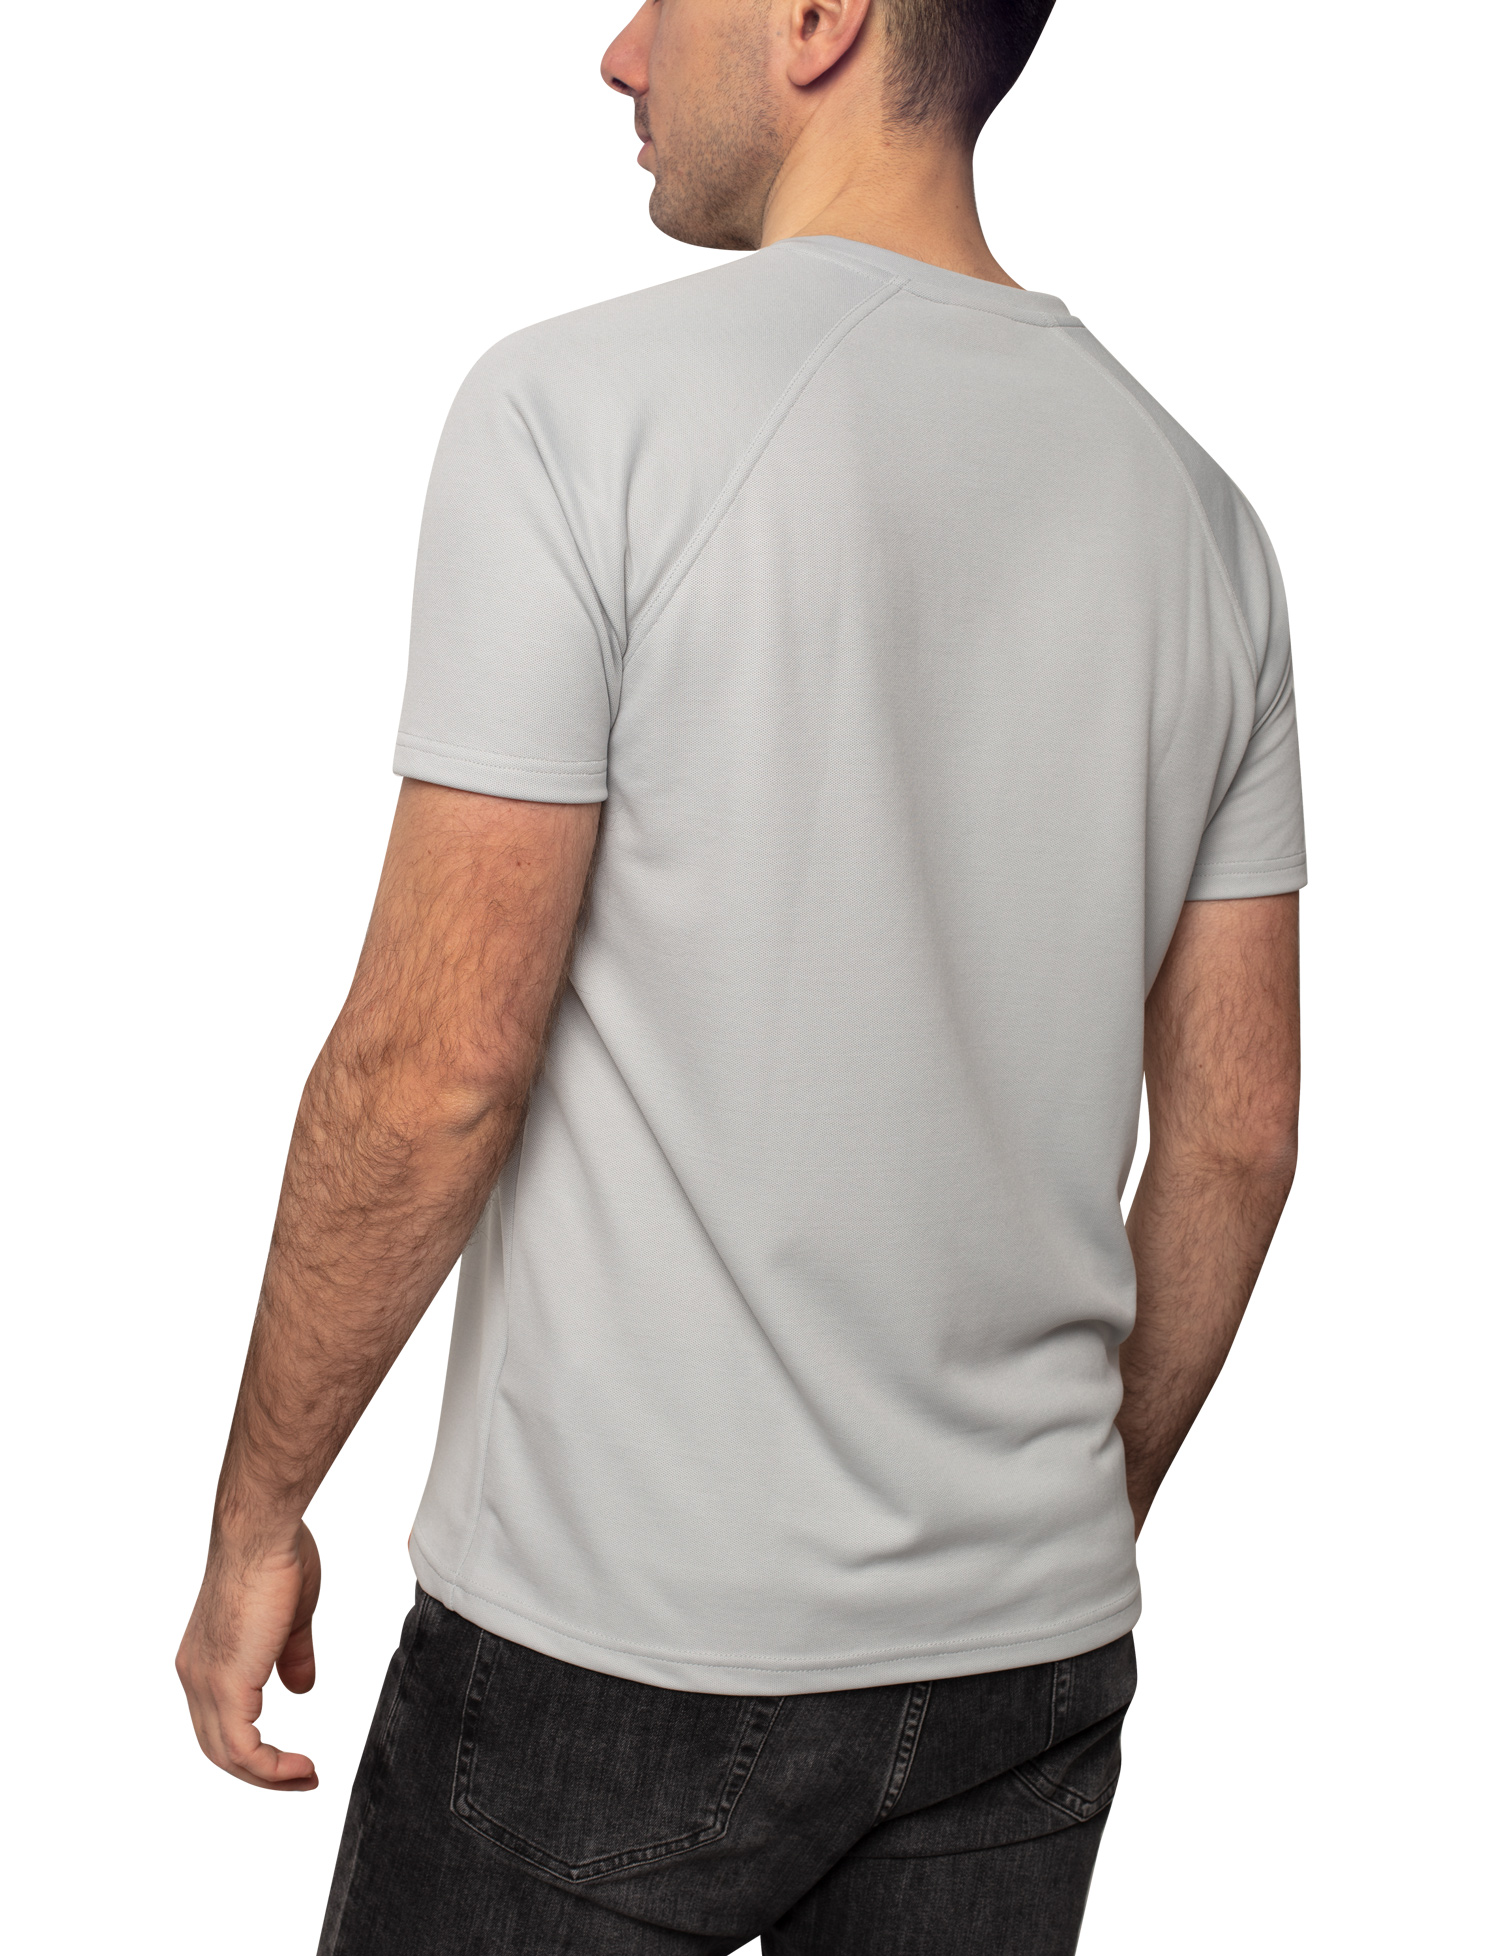 UV T-shirt for men leisure and everyday wear with V-neck 